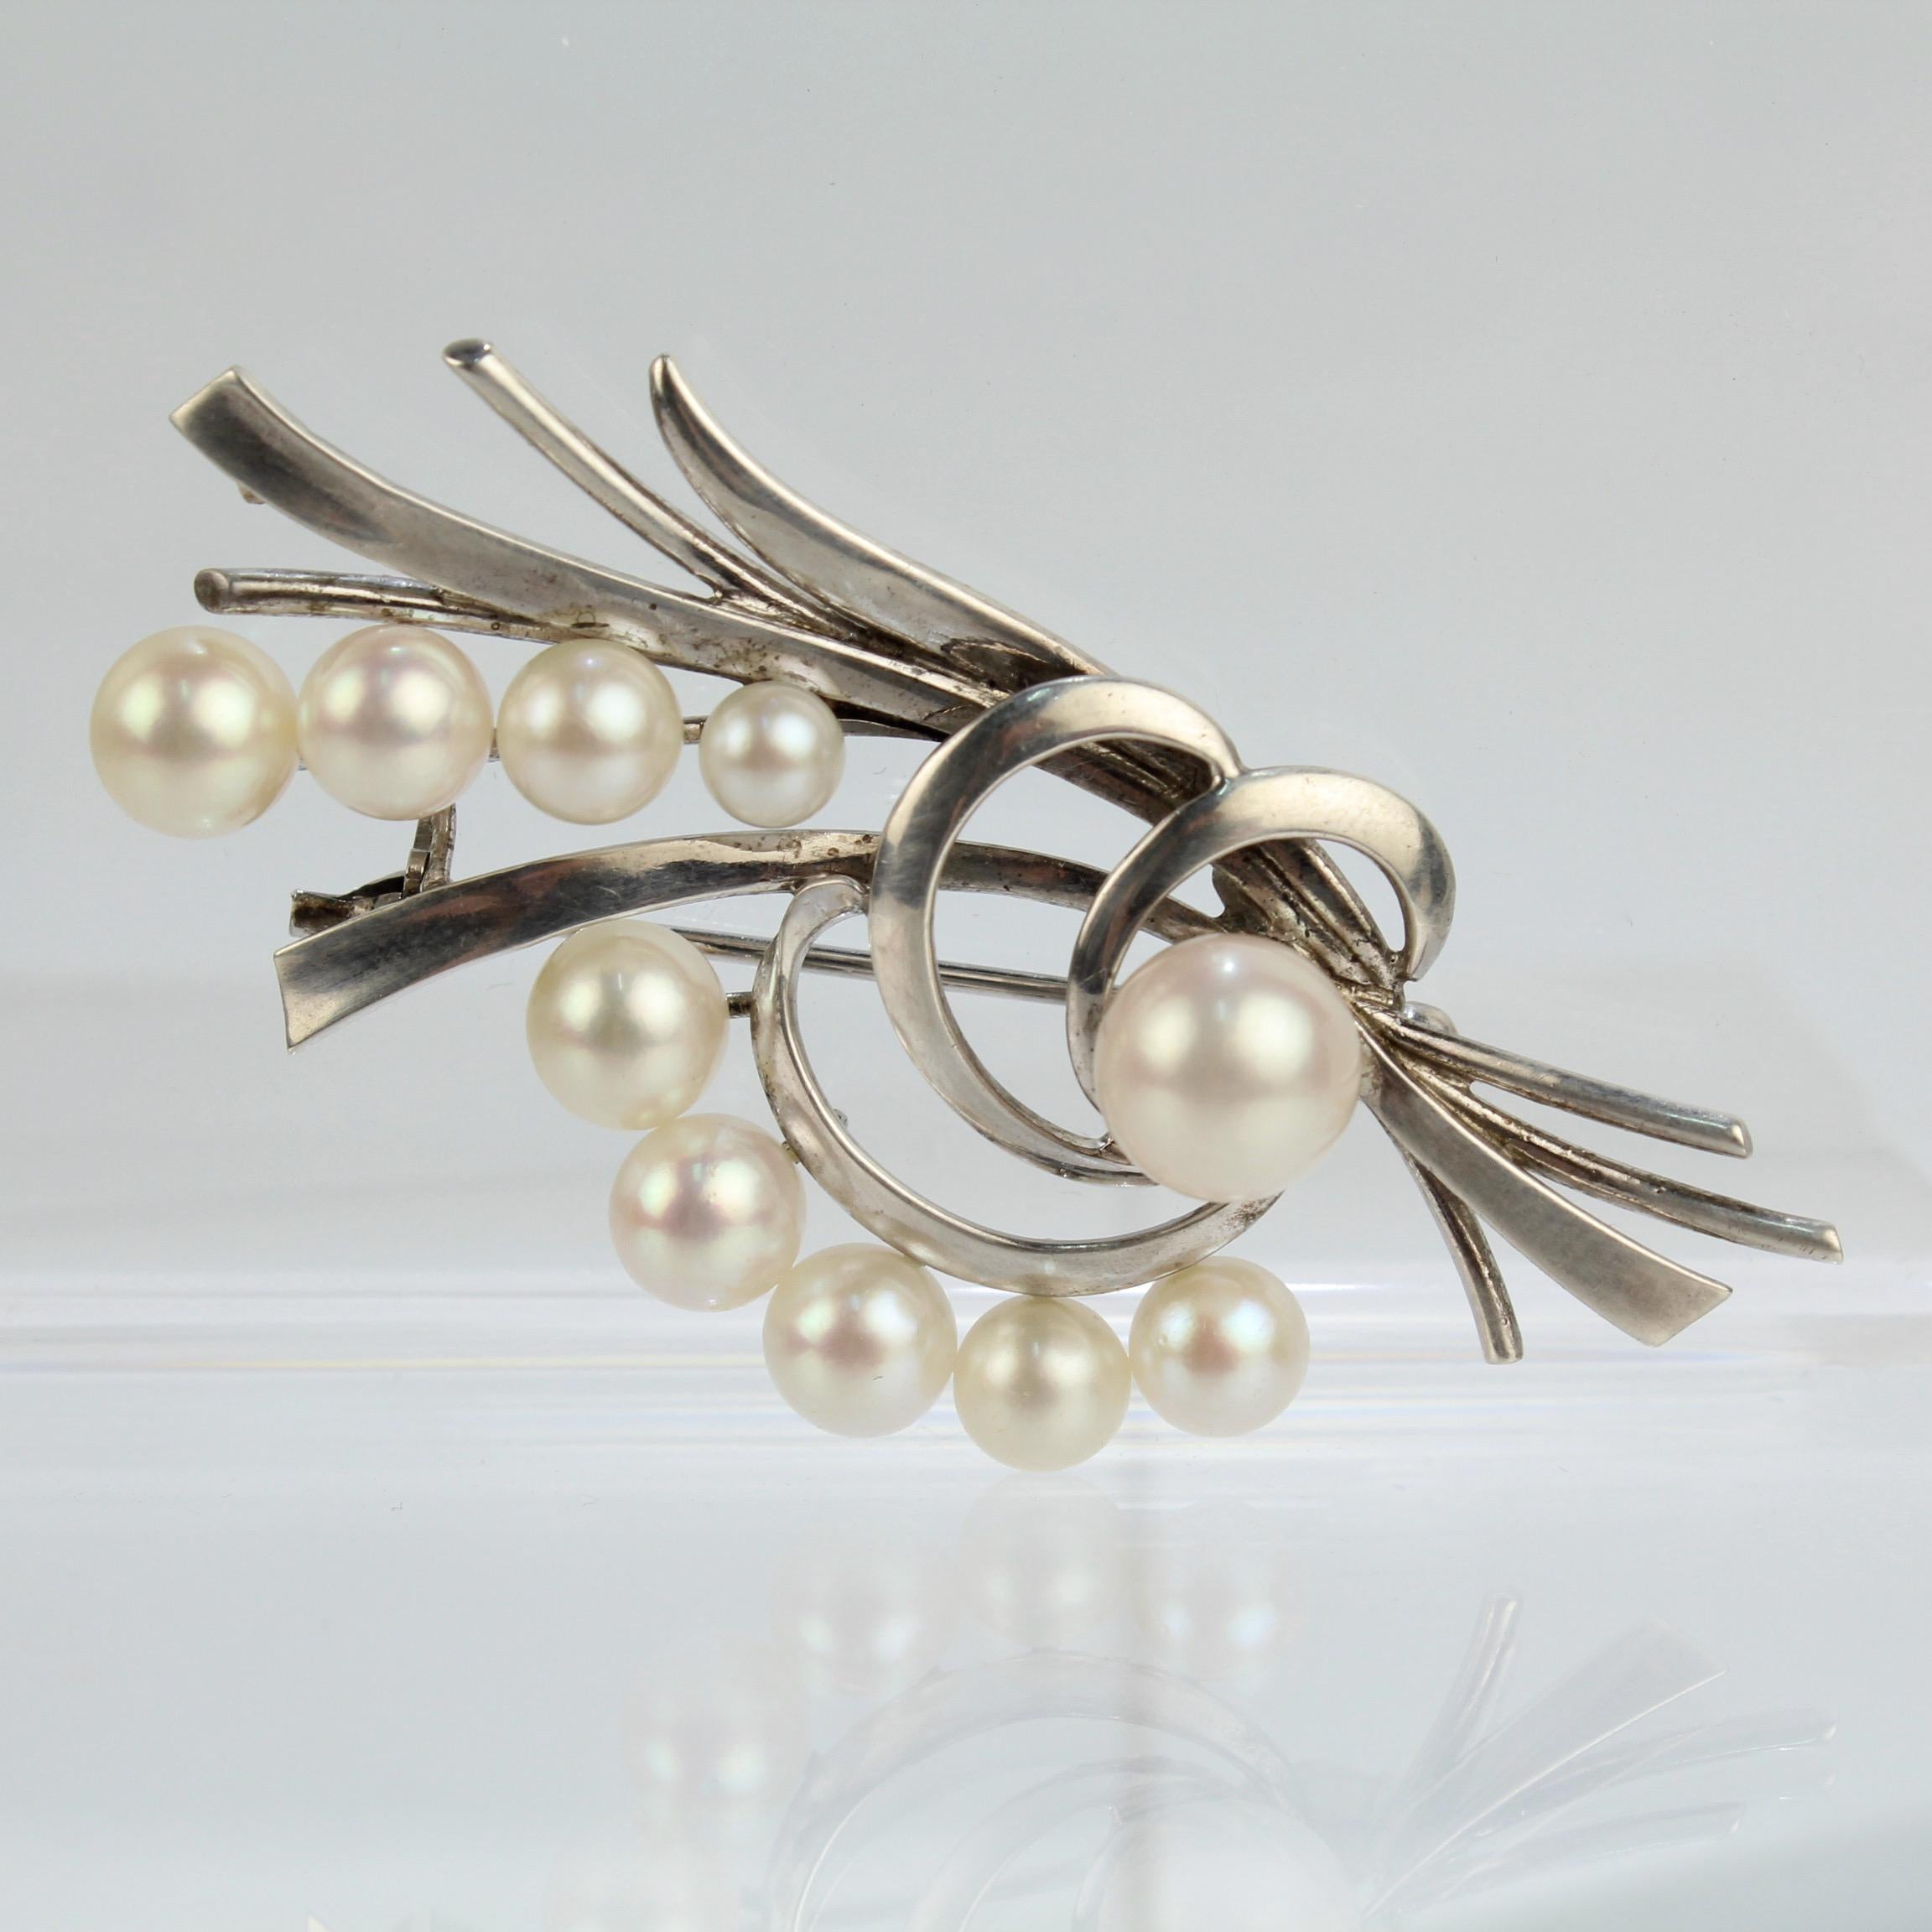 A very fine vintage Mikimoto Akoya cultured pearl and sterling silver brooch or pin.

With graduated round white pearls set on sterling silver bouquet-like stems.

Simply a fine brooch from the legendary Mikimoto!

Date:
20th Century

Overall